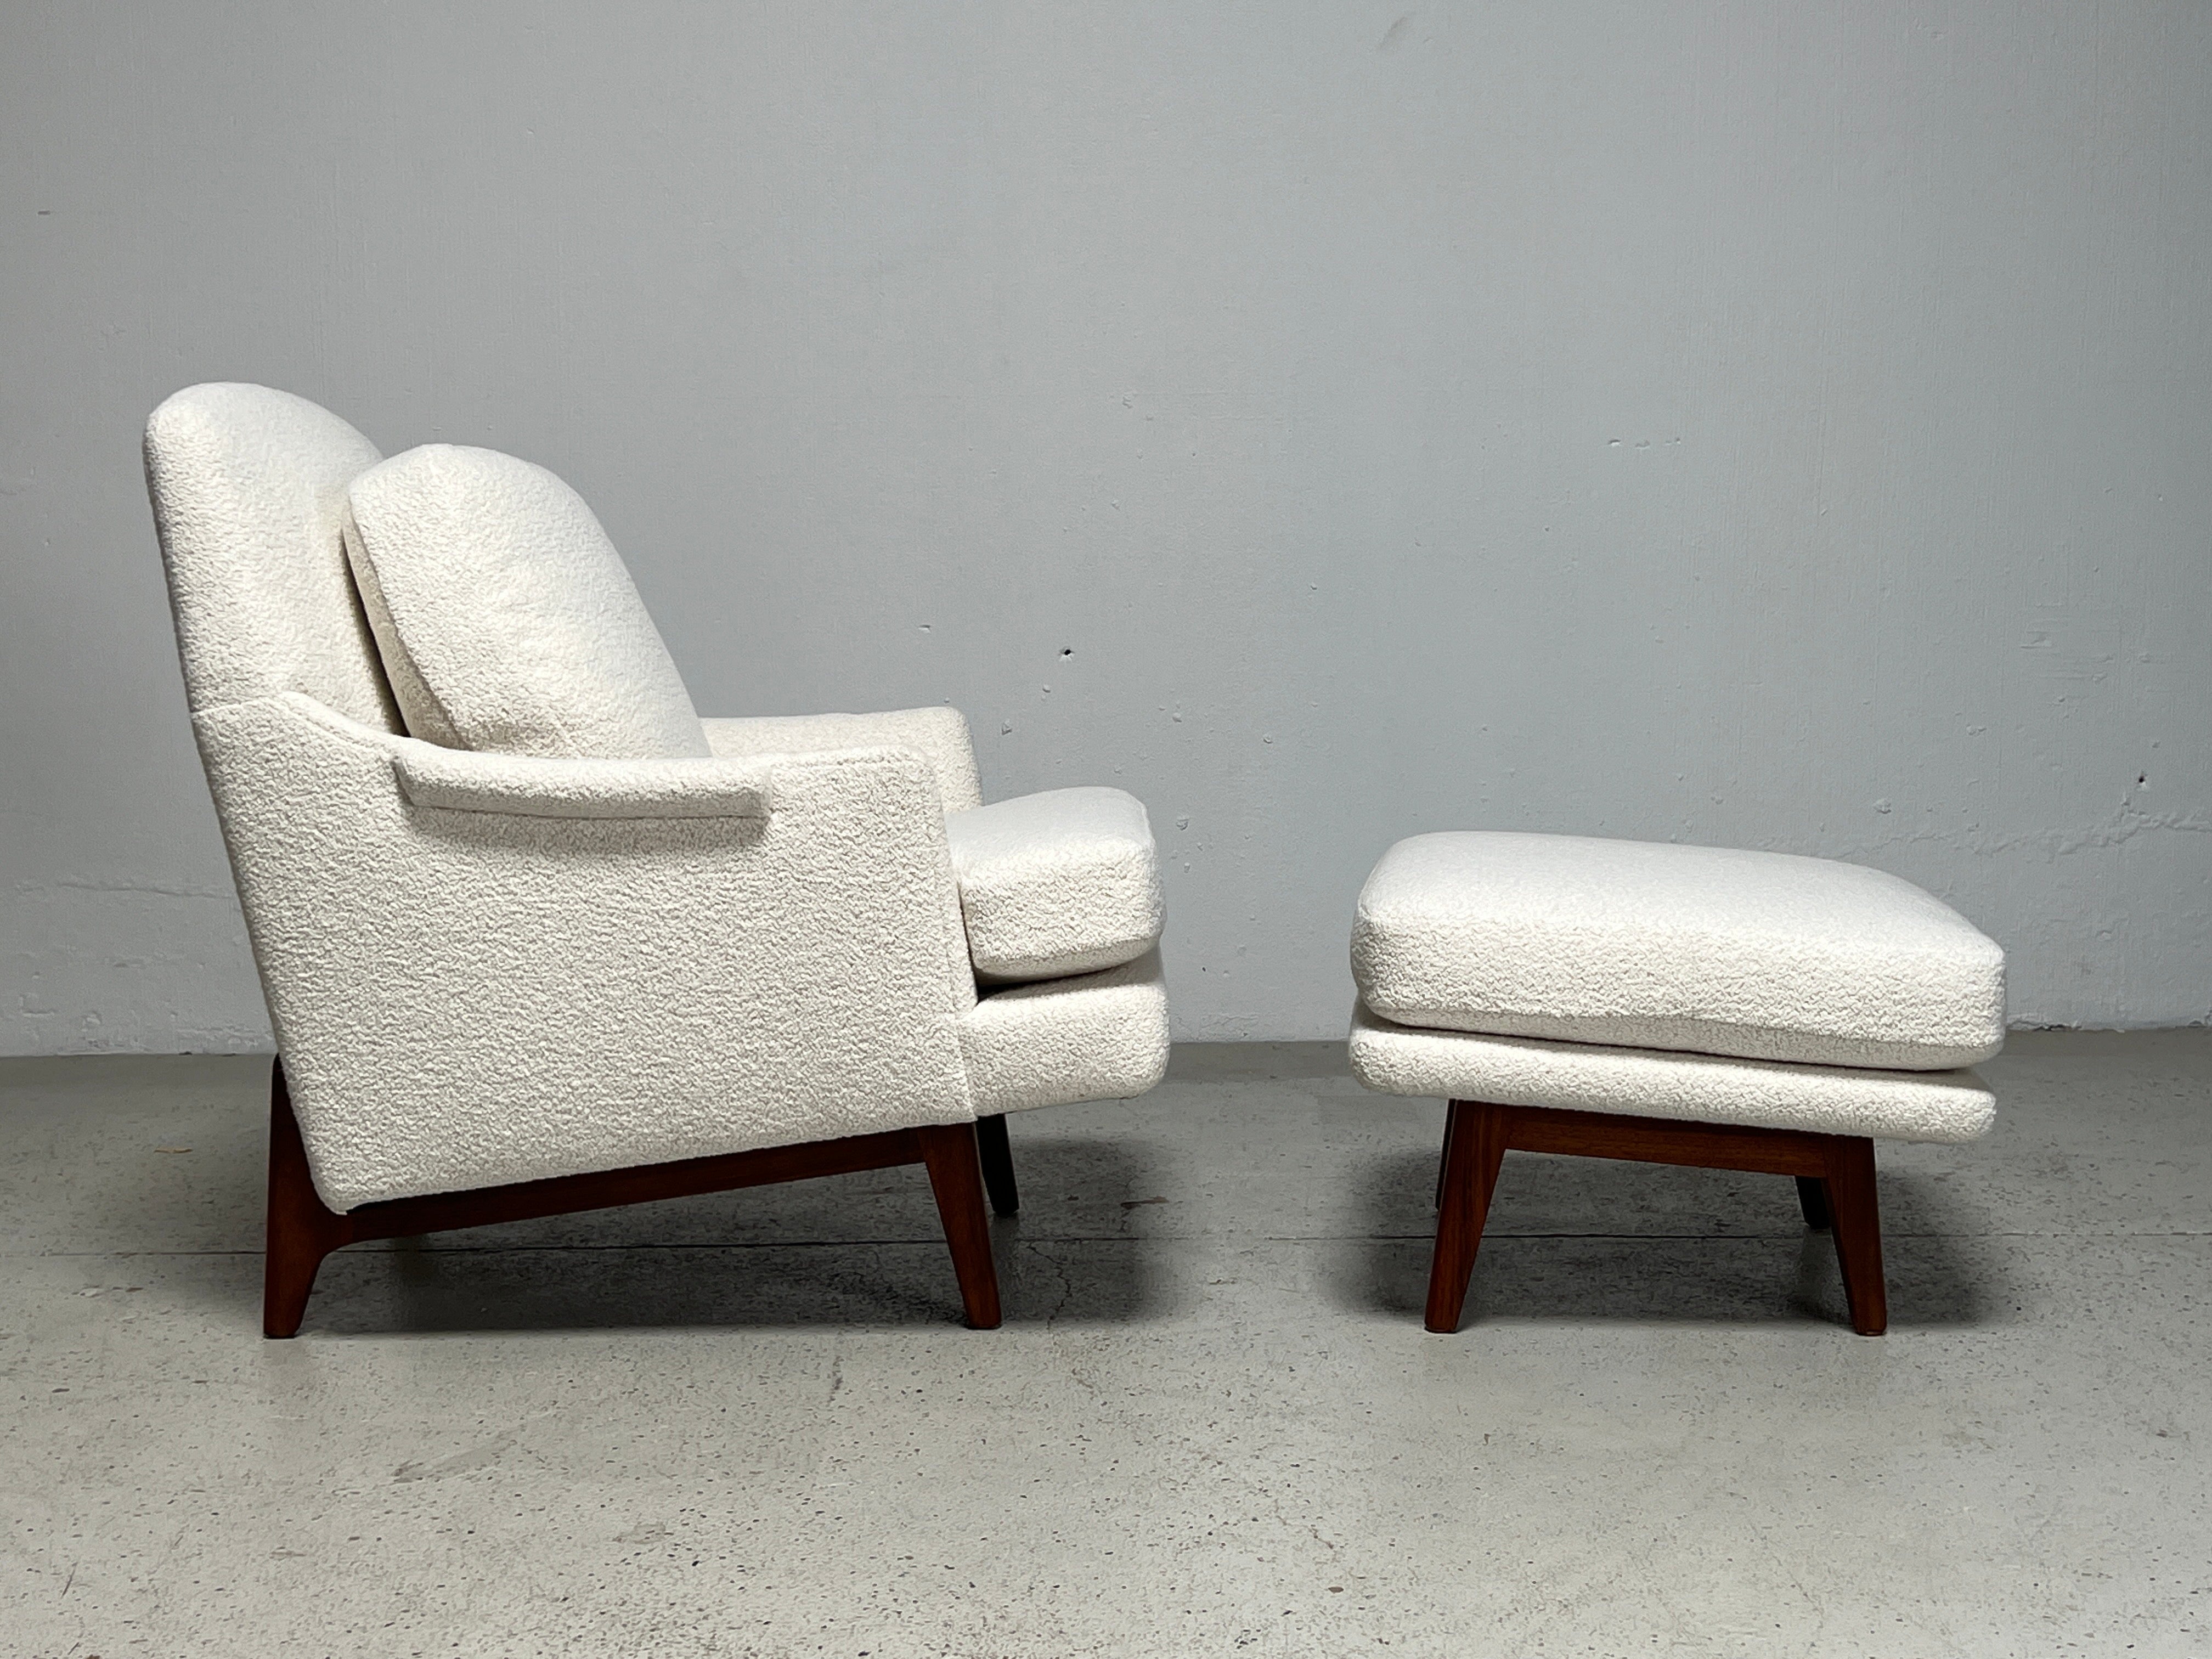 A Dunbar lounge chair and ottoman model 484 designed by Roger Sprunger. Fully restored and reupholstered in Holly Hunt fabric. 